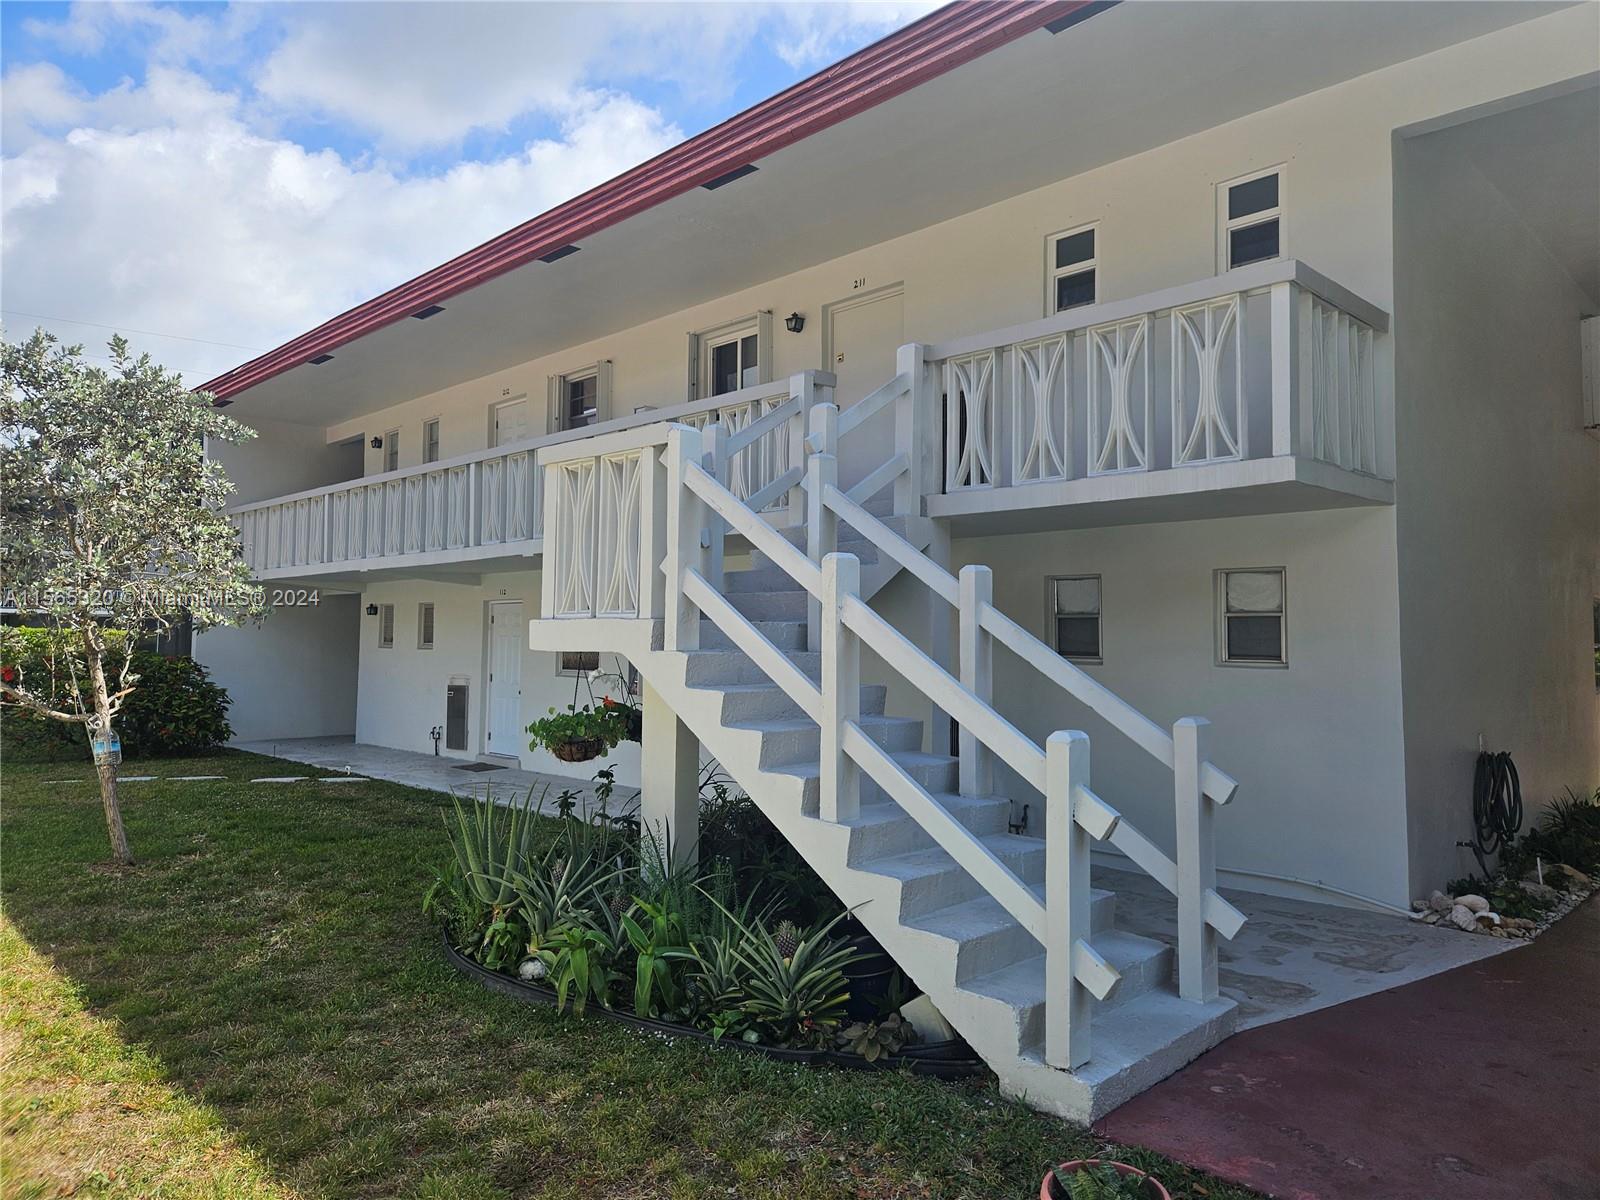 899 SE 2nd Ave 214, Deerfield Beach, Florida 33441, 2 Bedrooms Bedrooms, ,2 BathroomsBathrooms,Residential,For Sale,899 SE 2nd Ave 214,A11565320